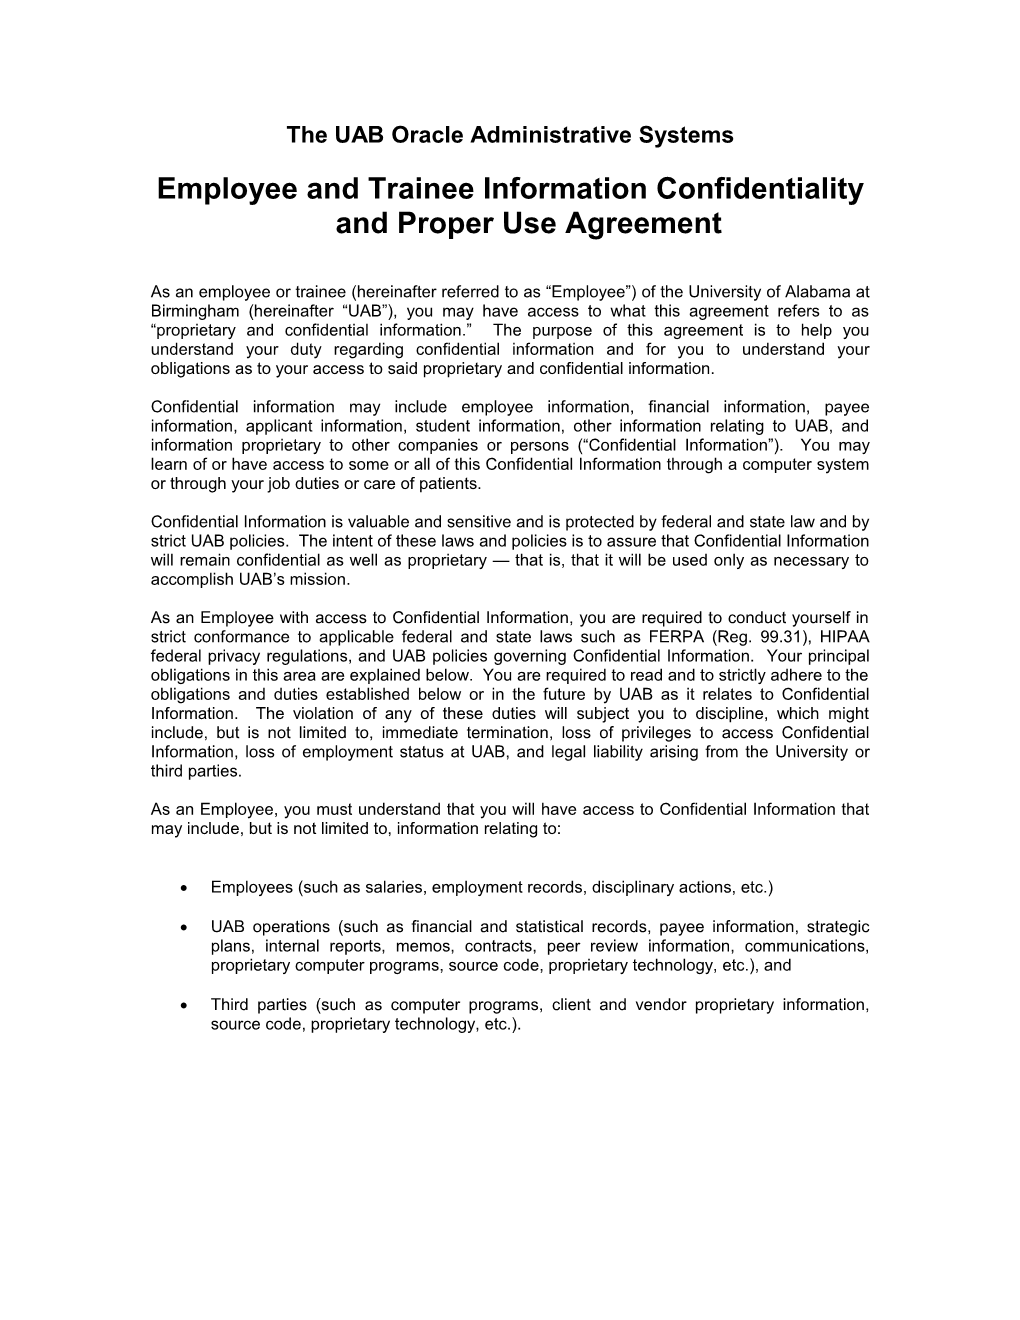 Information Confidentiality and Proper Use Agreement